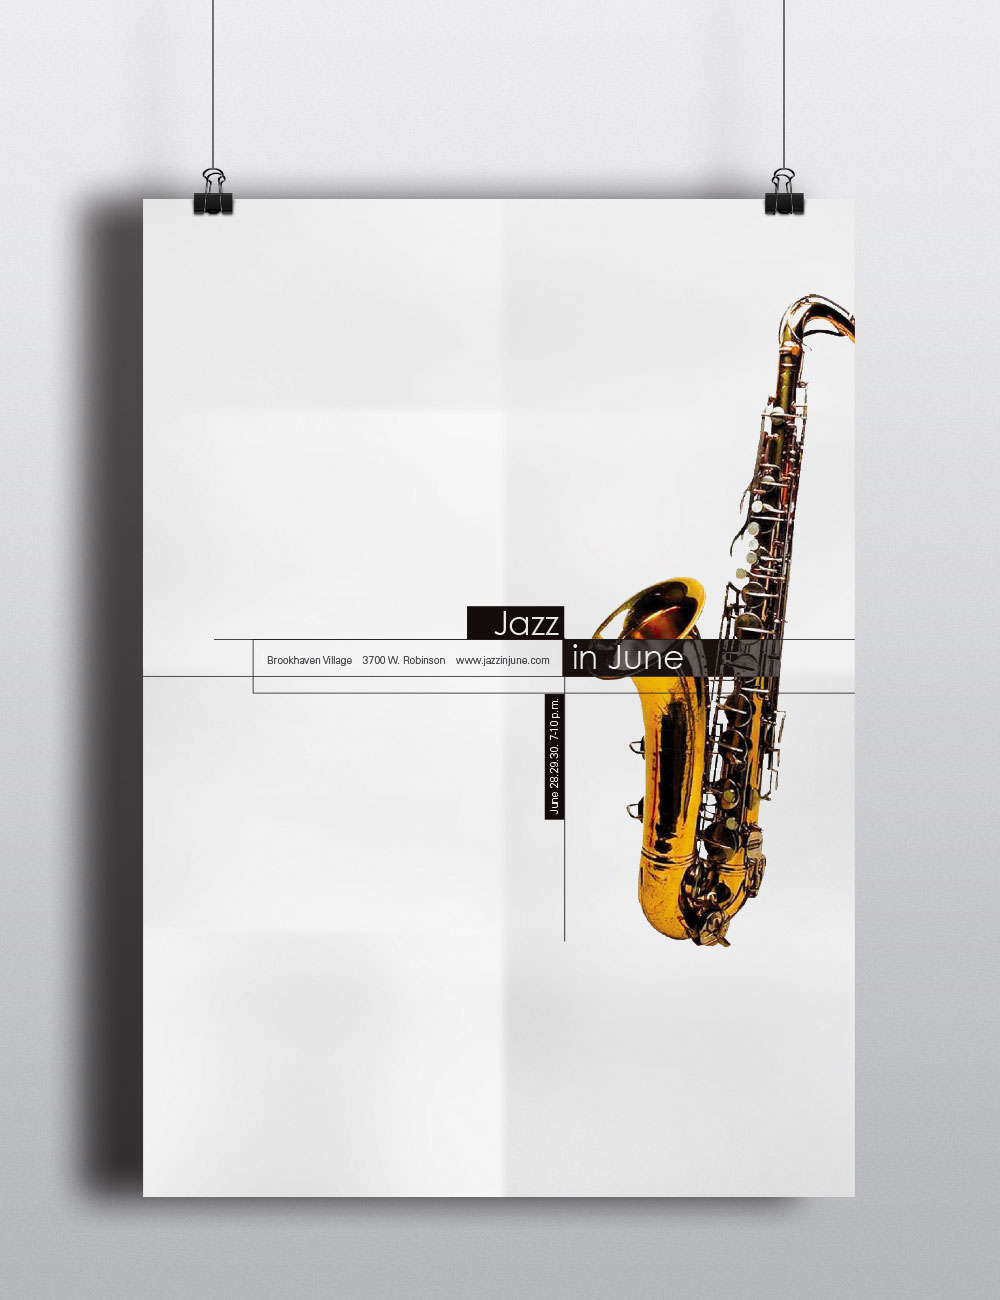 Jazz in June festival event poster concept 1